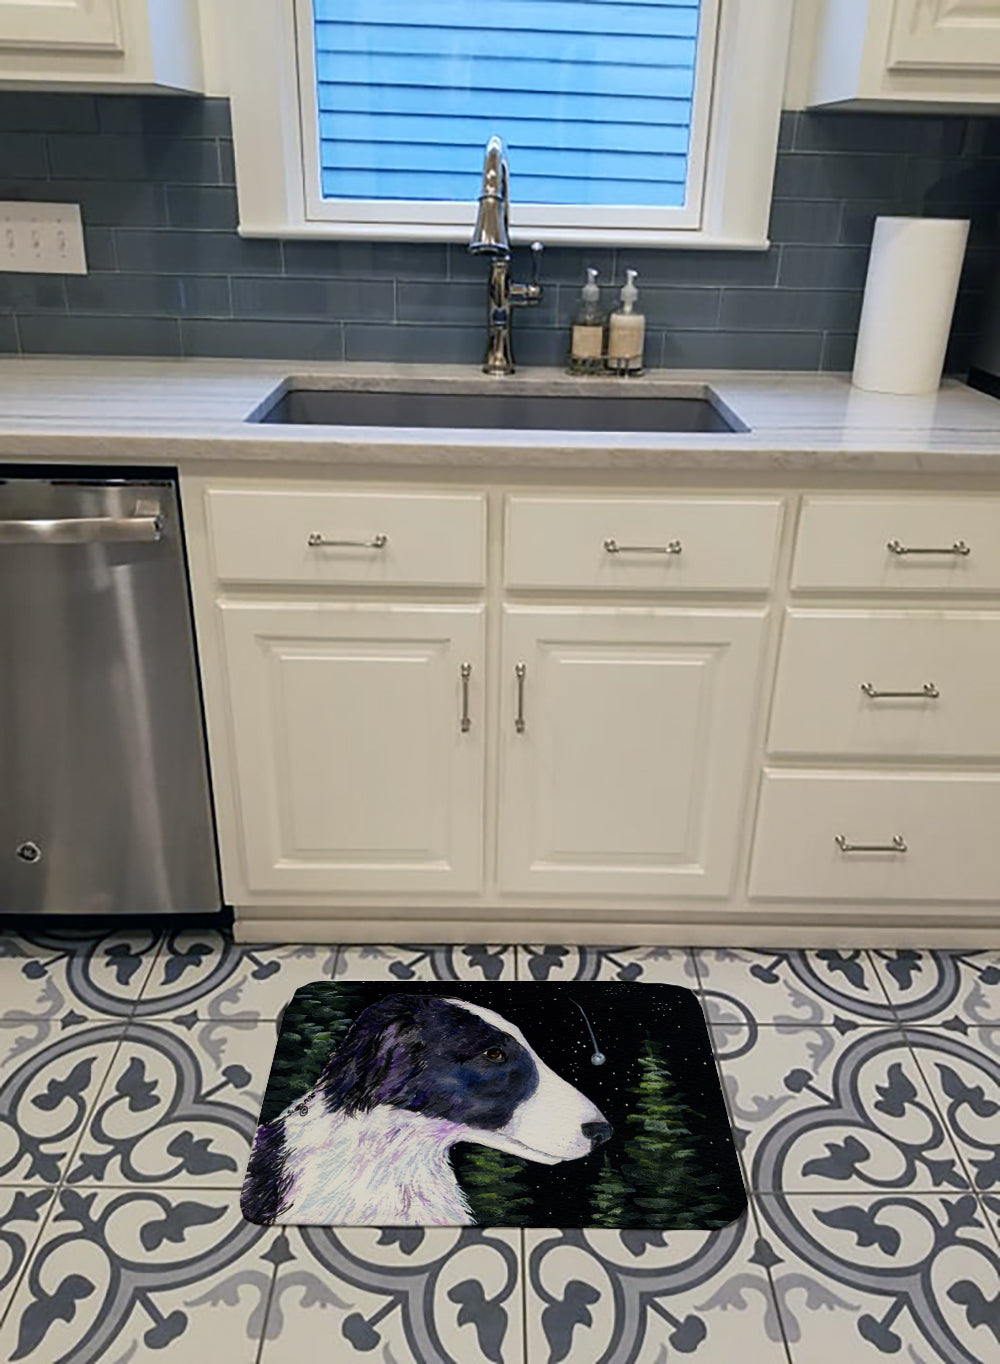 Starry Night Border Collie Machine Washable Memory Foam Mat SS8490RUG - the-store.com